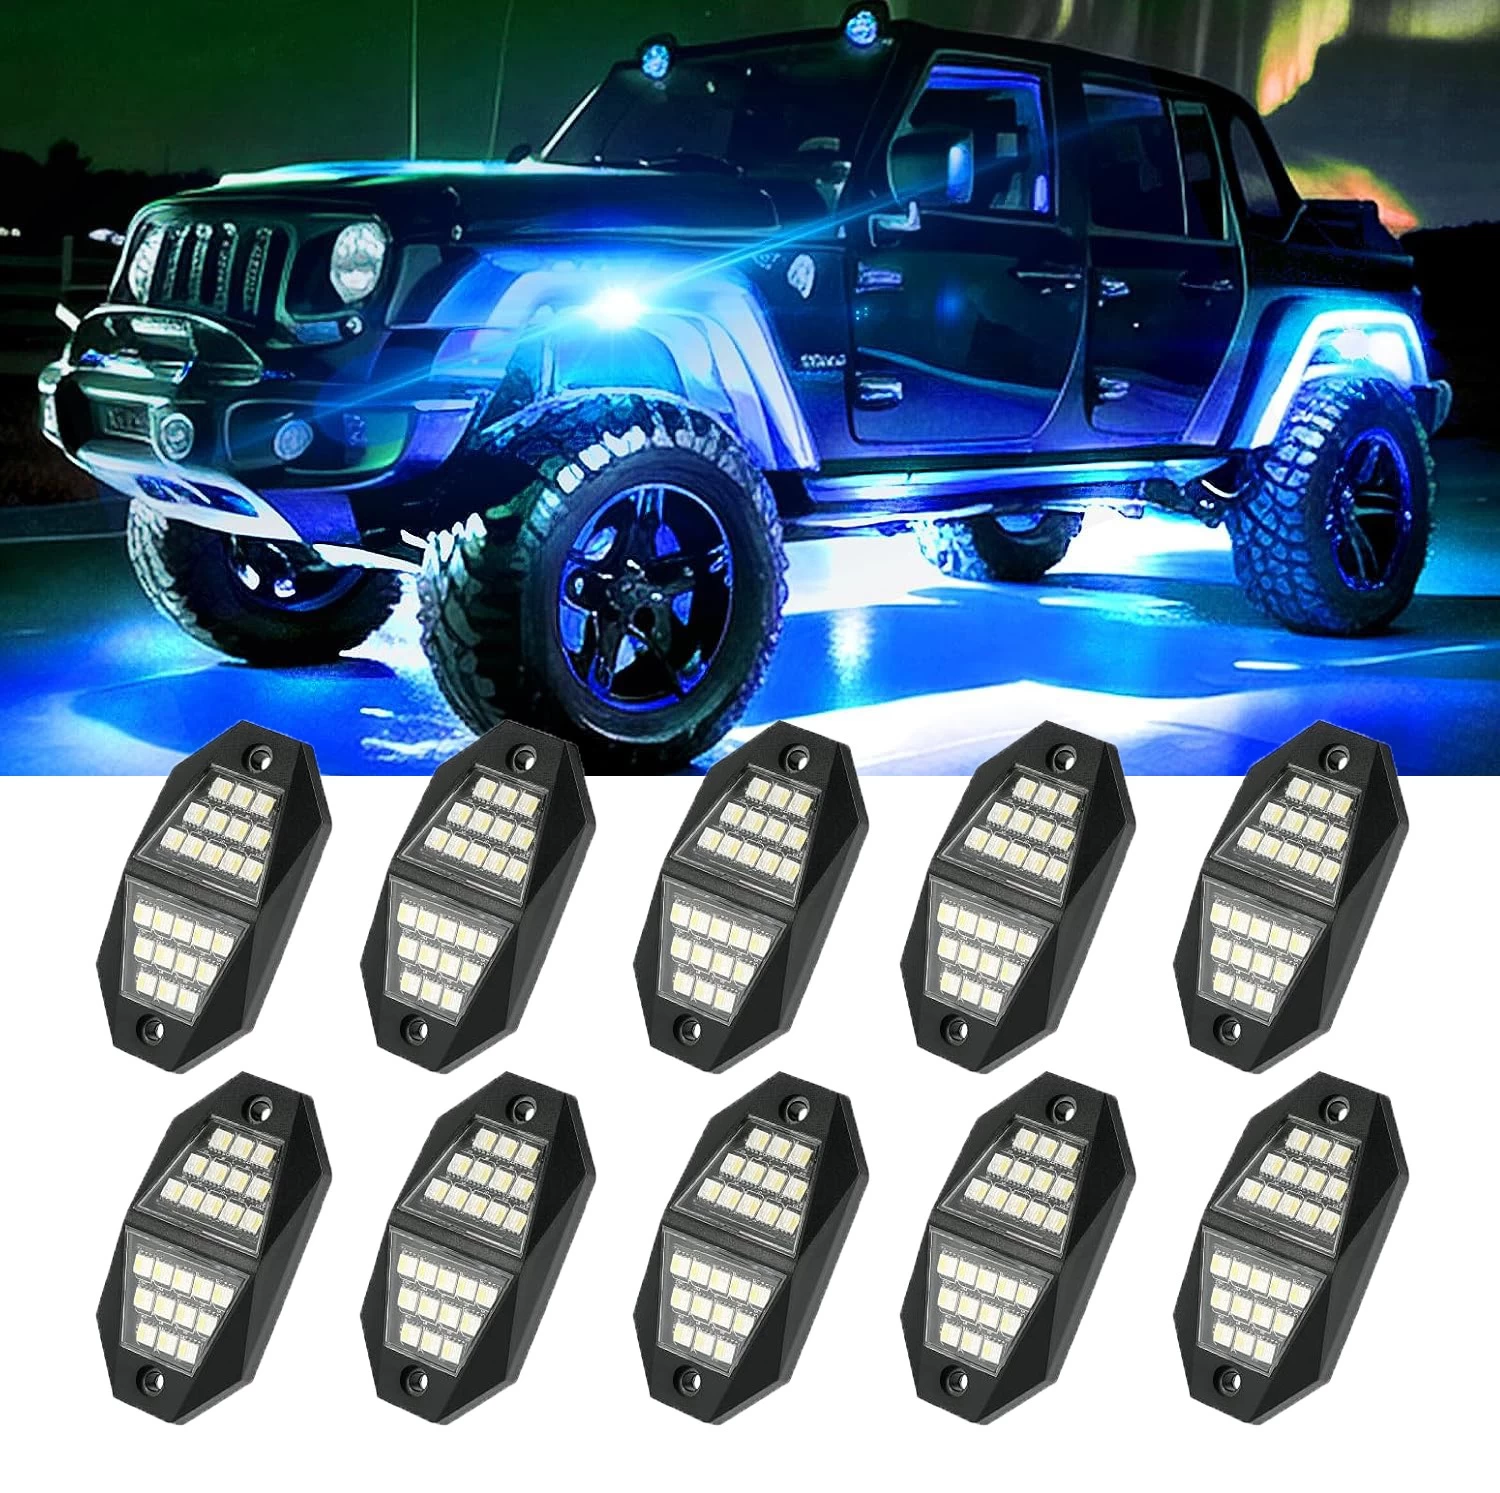 porcelana 5 Sides LED Rock Lights 8 Pods Multicolor Underglow Lights for Trucks with App Control Flashing Music Mode RGB Rock Lights for Boat SUV Car Accessories - COPY - lf3jlu fabricante